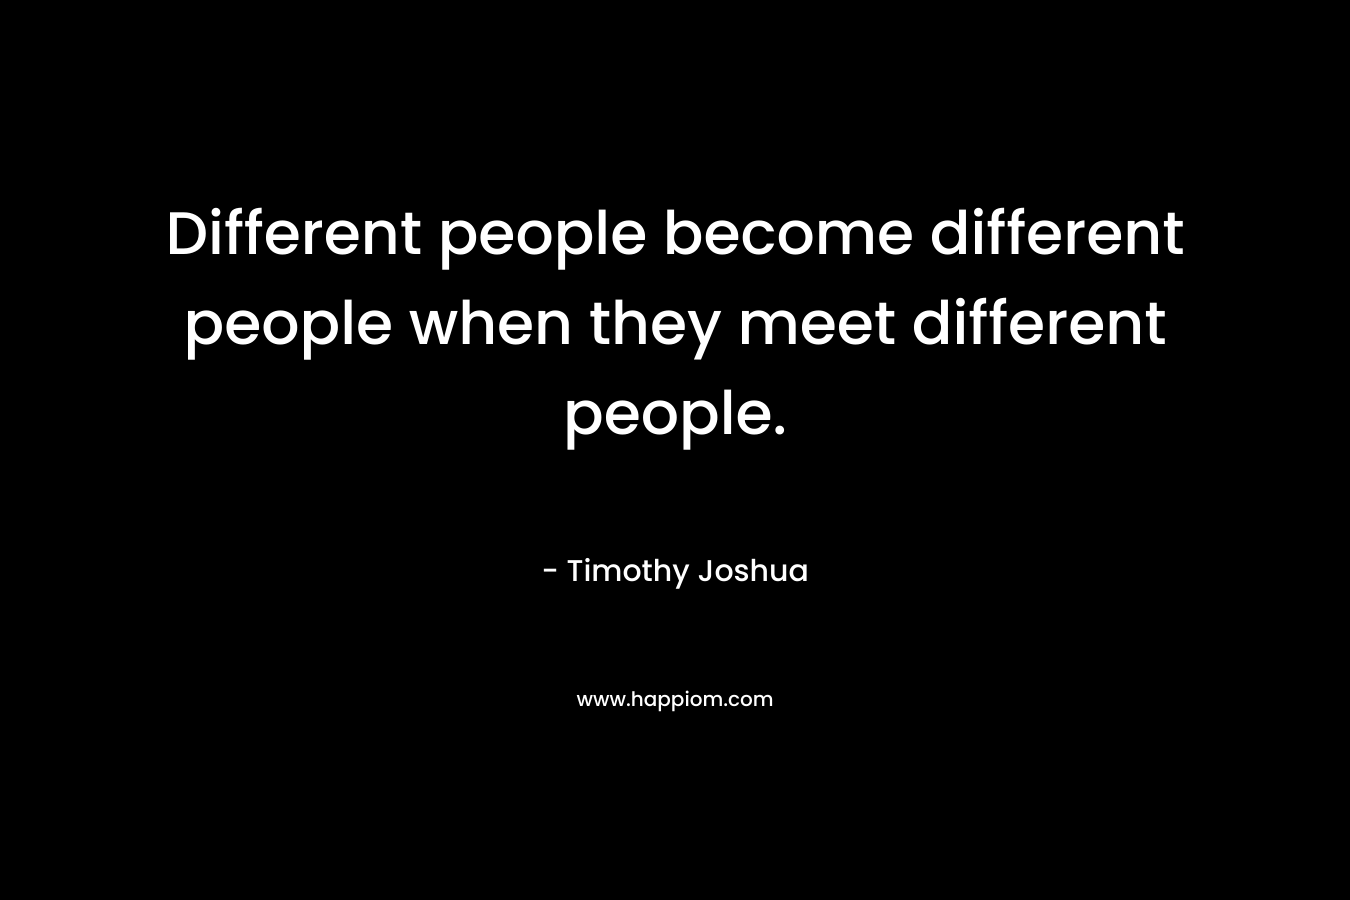 Different people become different people when they meet different people.